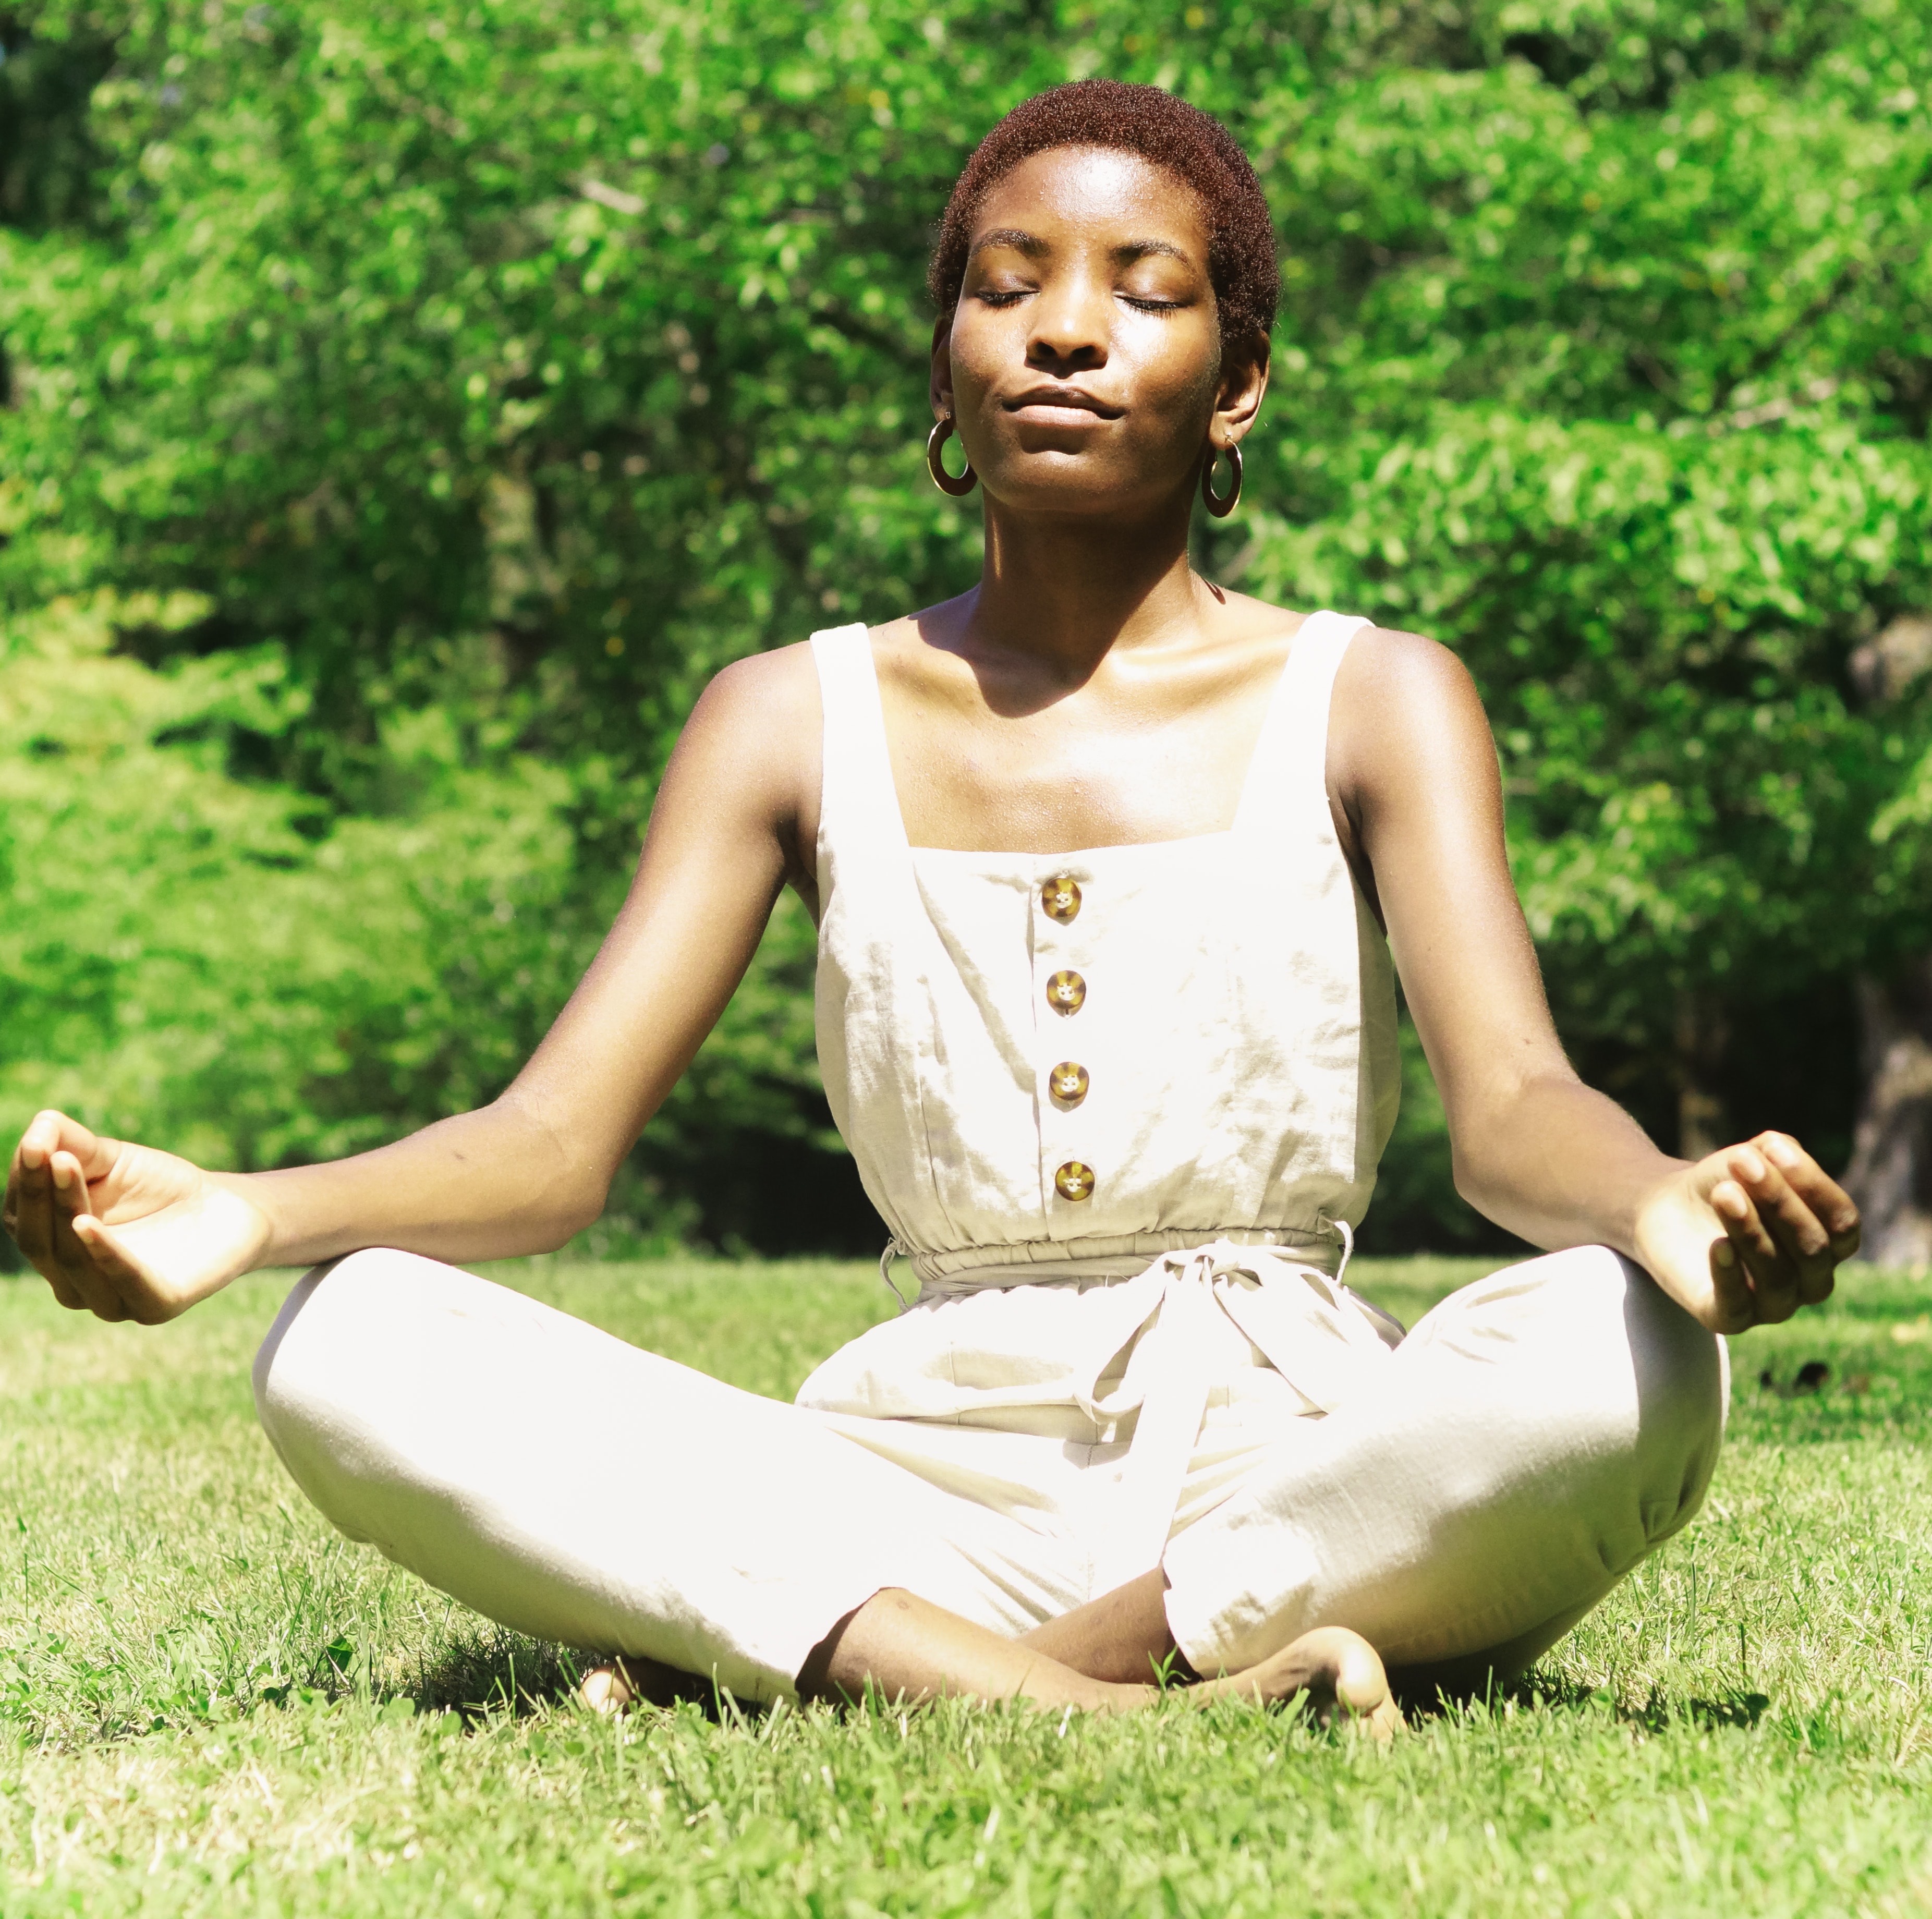 Black woman sitting on grass meditating with green trees in background